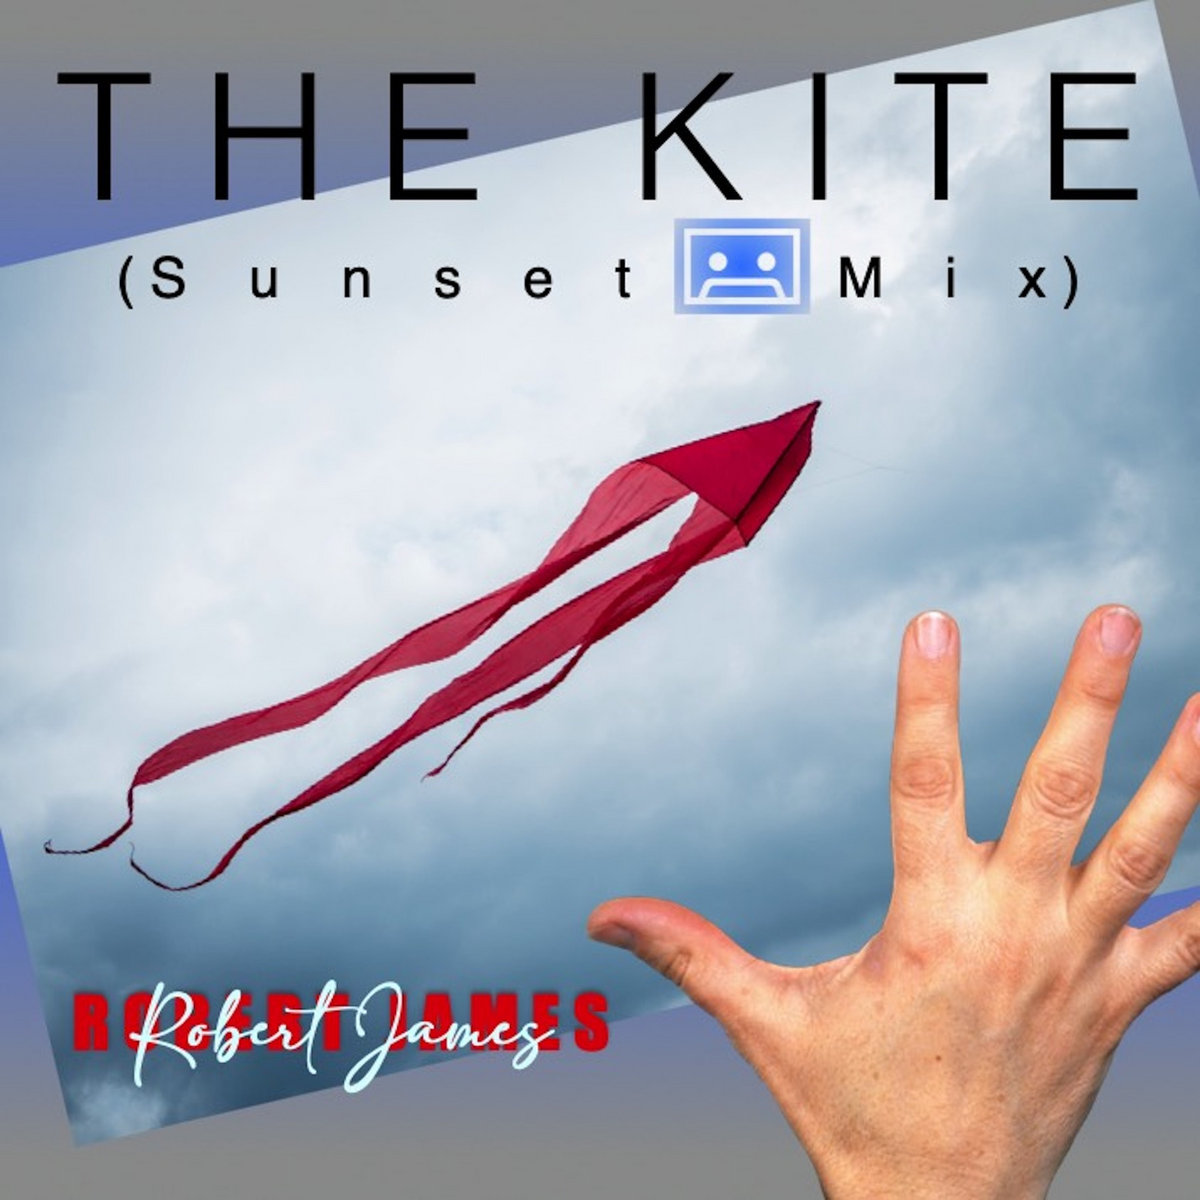 Cover Photo for The Kite, an outstretched hand reacing for a kite in the sky.